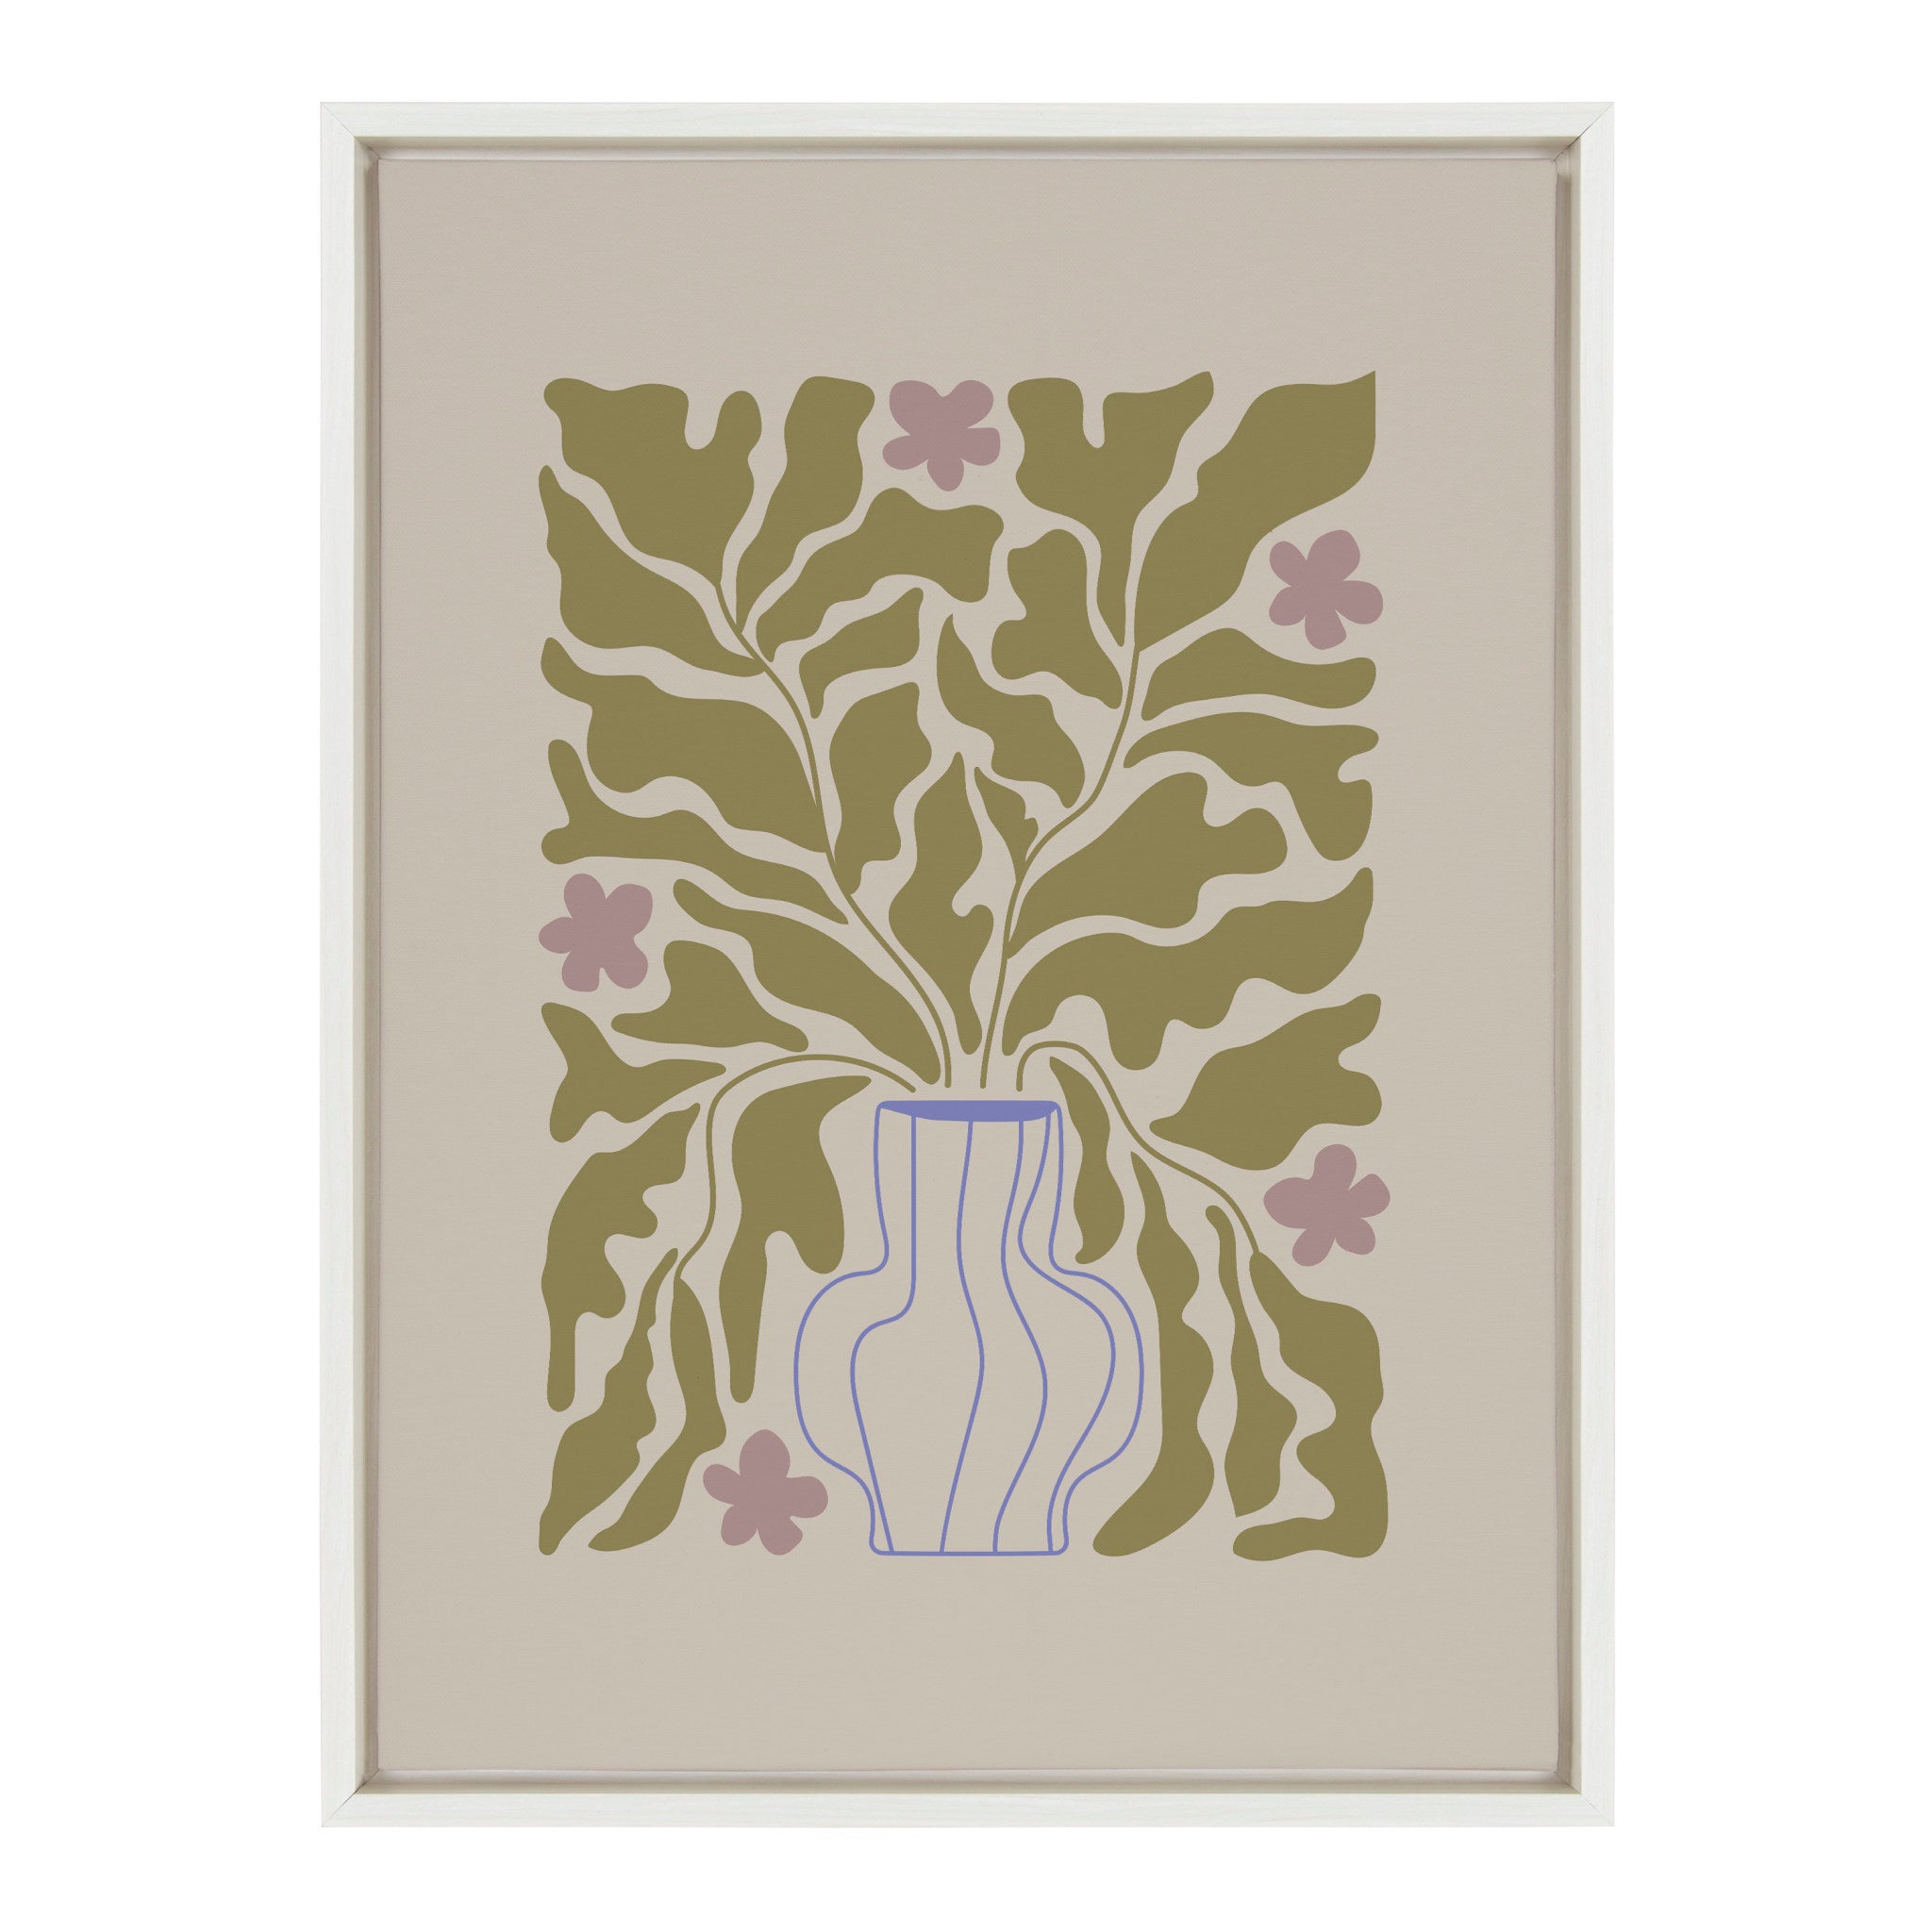 Sylvie Colorful Abstract Retro Floral Blue Vase Framed Canvas by The Creative Bunch Studio